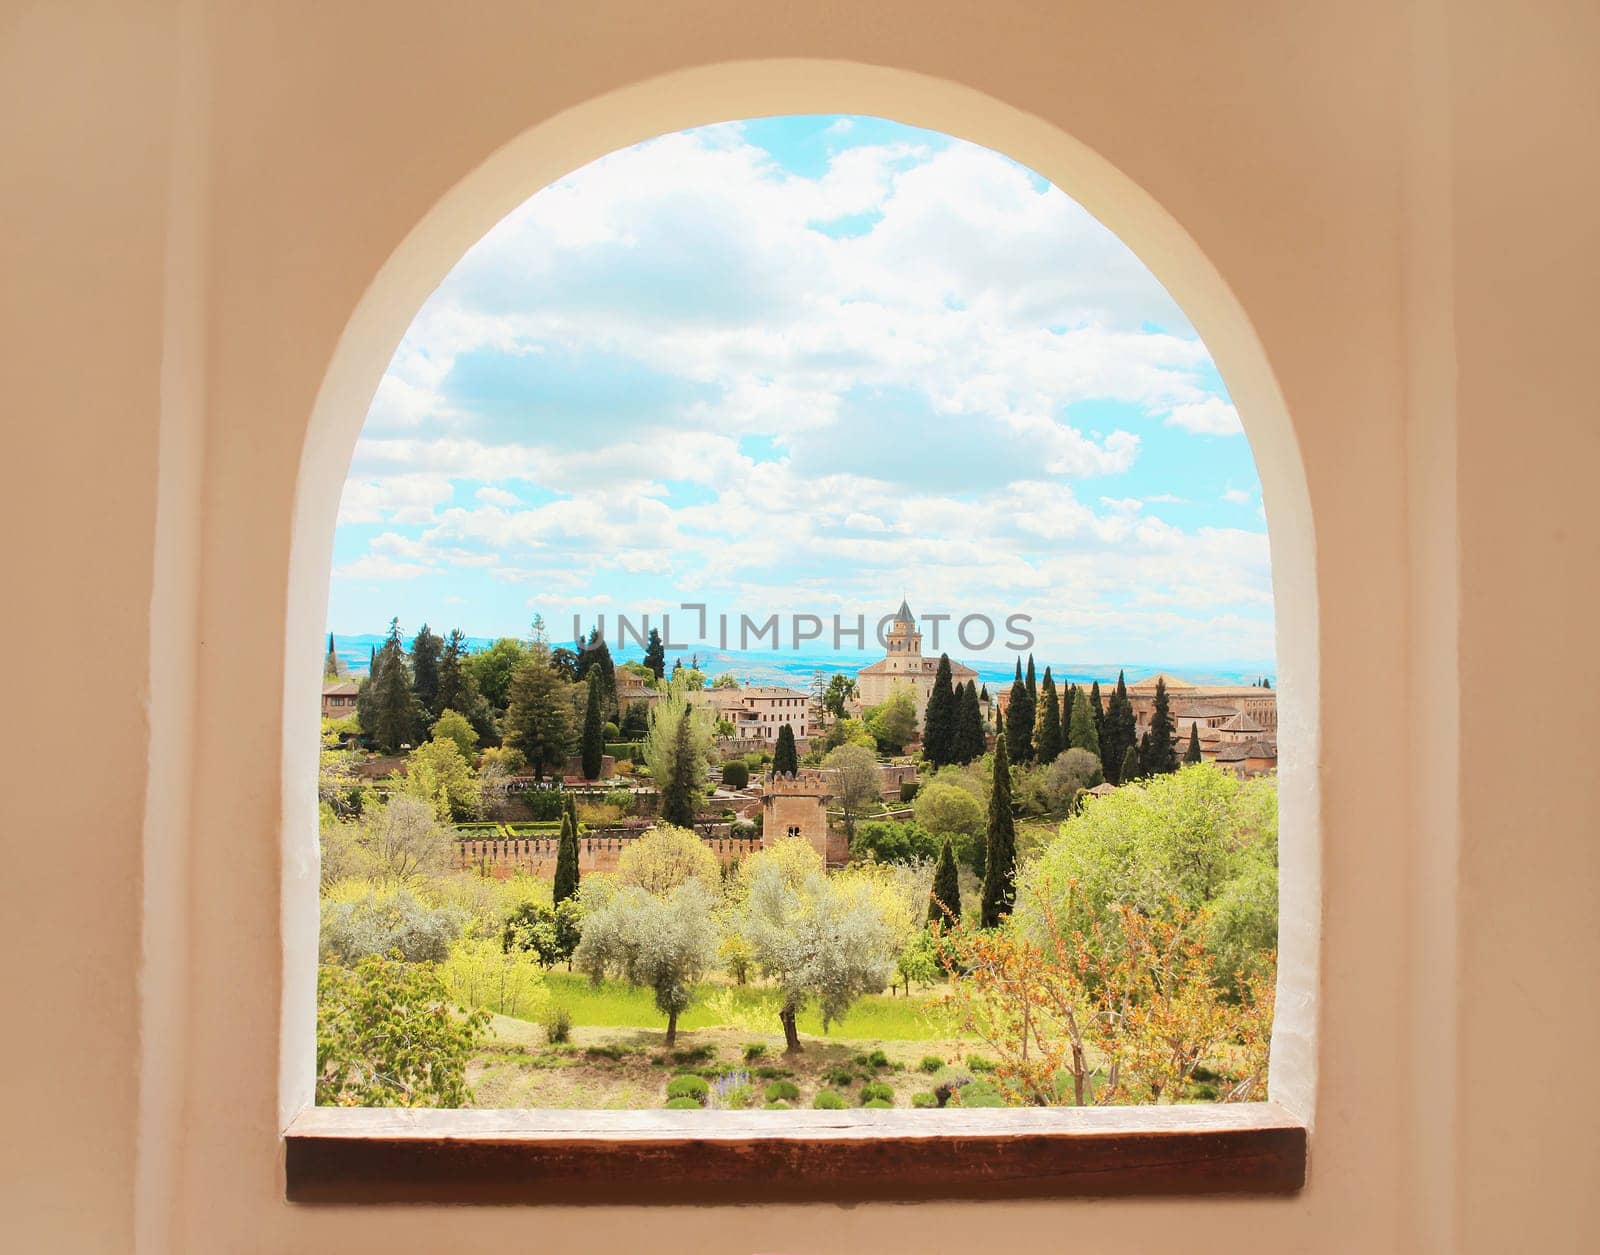 Alhambra, Granada, Andalusia, Spain. Palace and fortress complex. View through window. by Rohappy